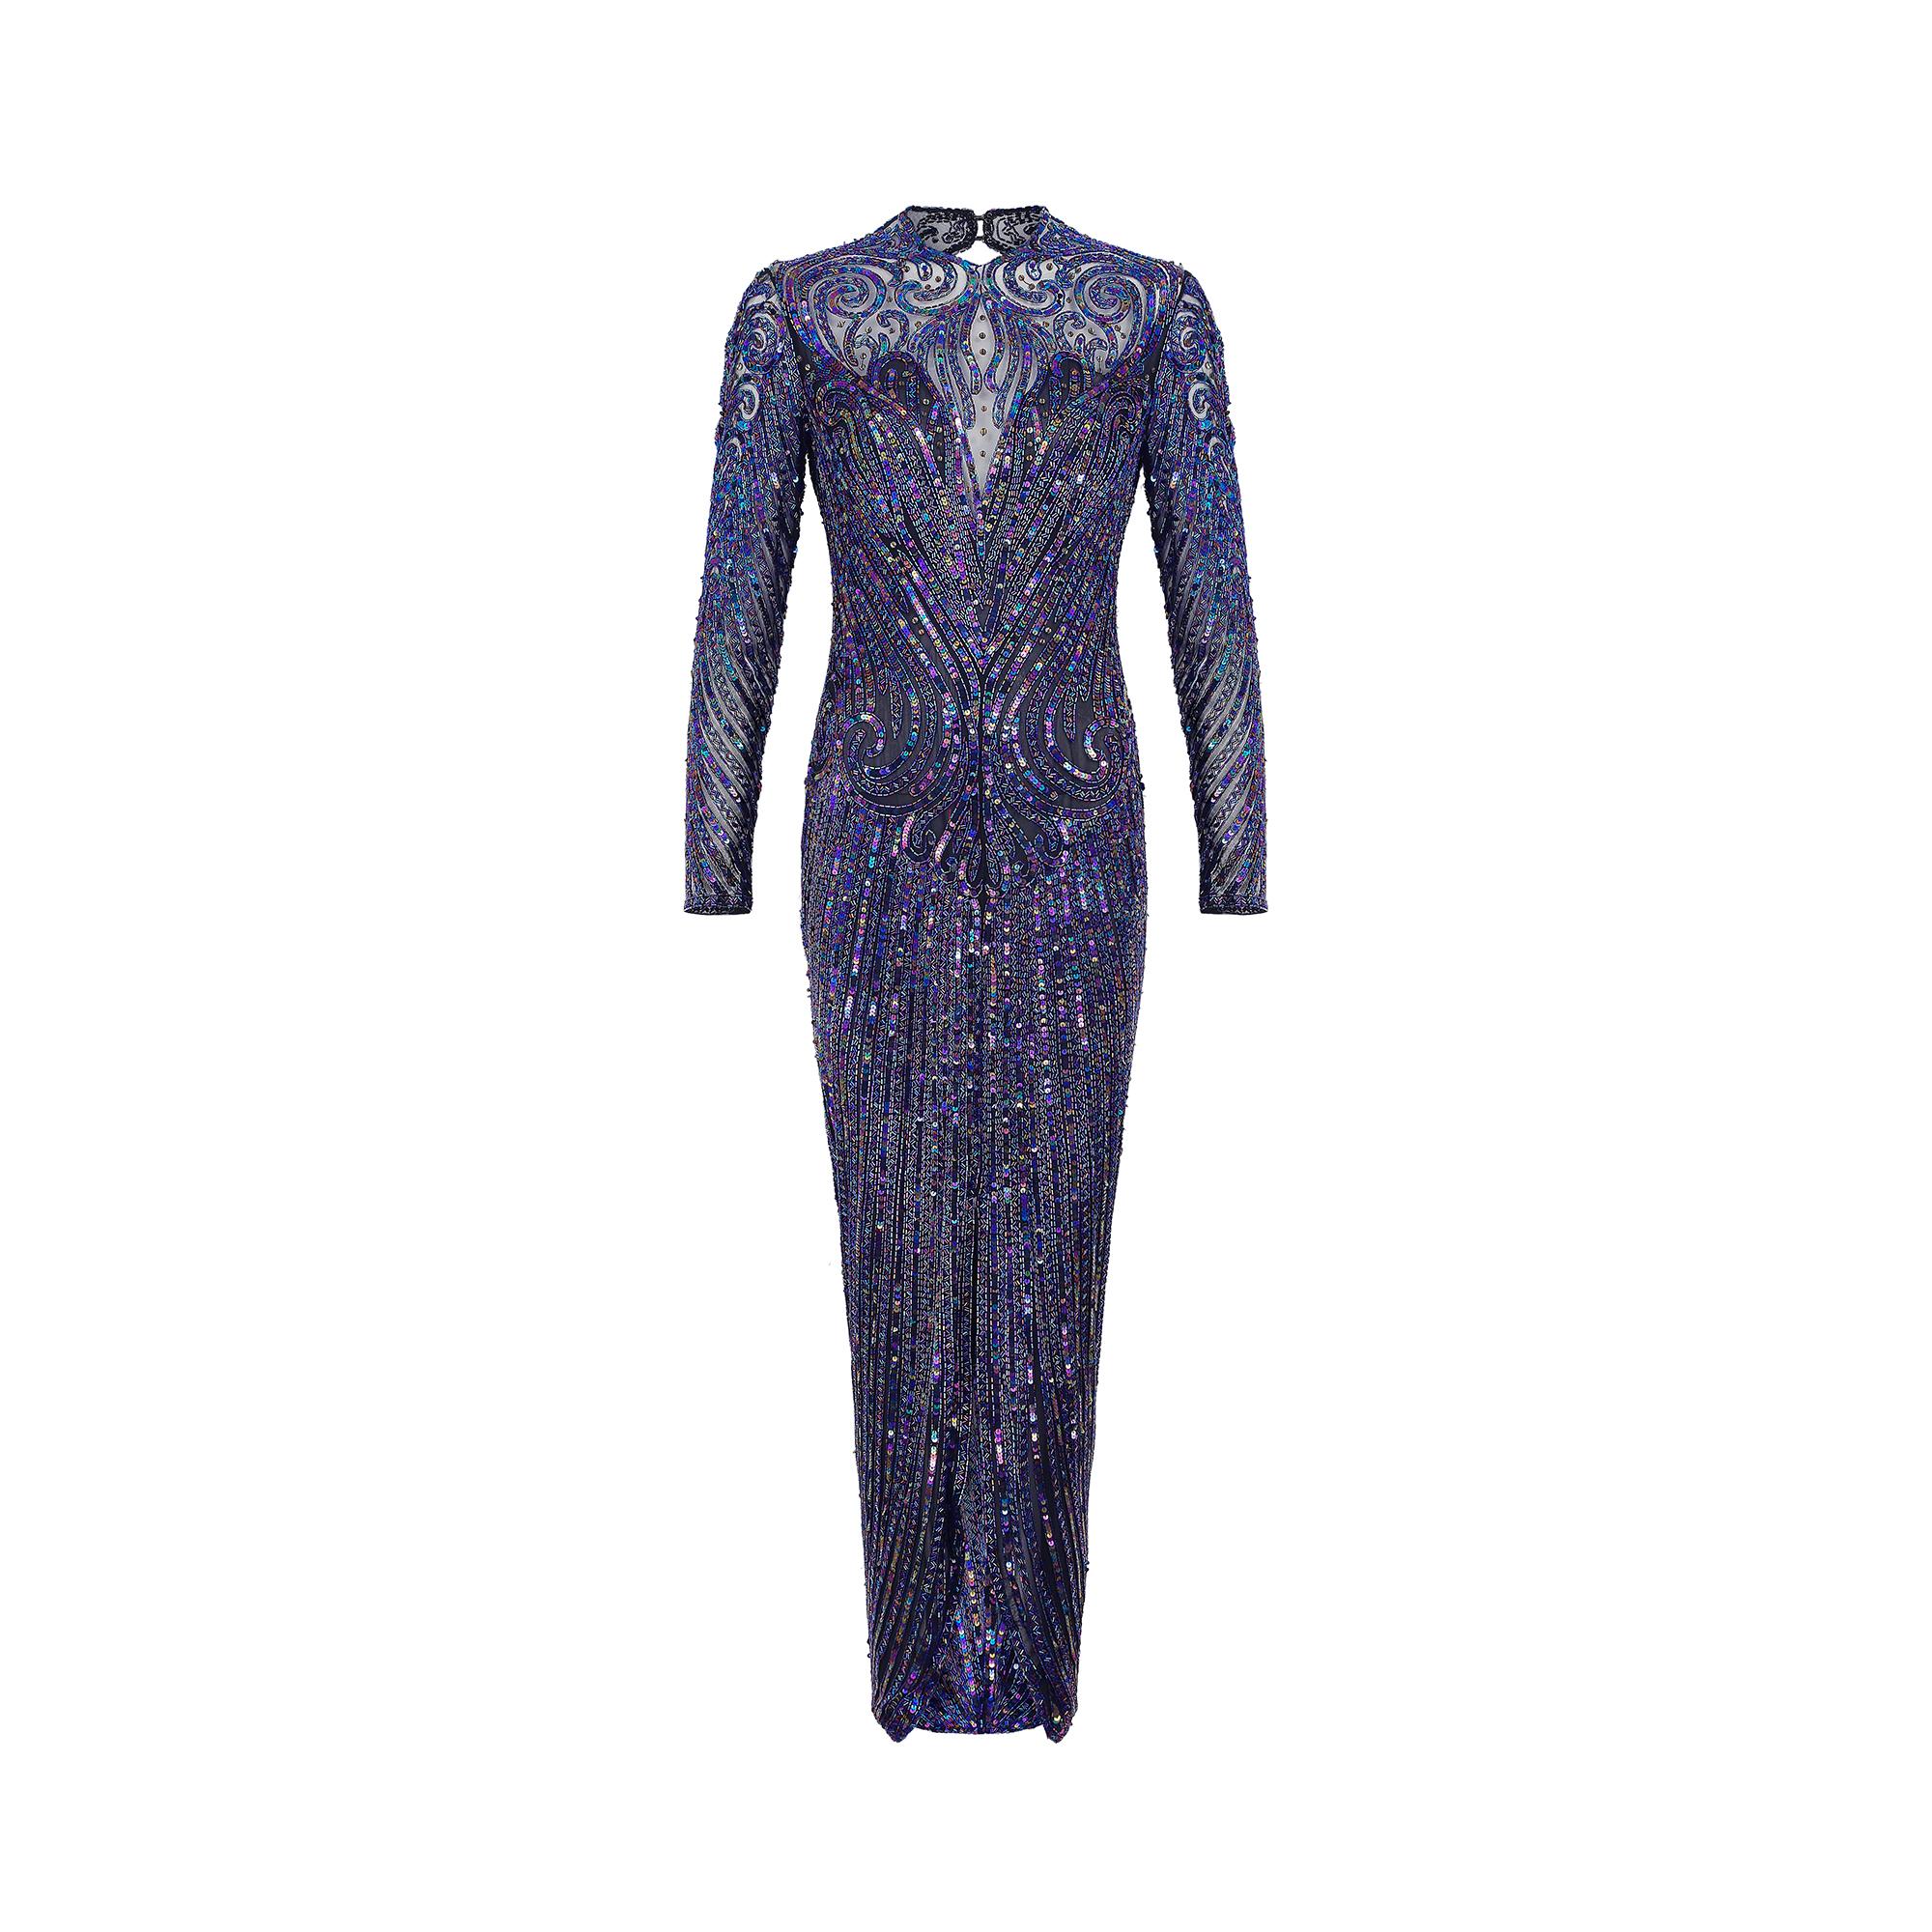 Fabulous Bob Mackie long sheath dress and fully embellished in iridescent midnight blue sequins and bugle beads. Circa early 1990s, the neckline is high and the collar and bodice is extremely detailed with a mesh panel giving the illusion of a deep